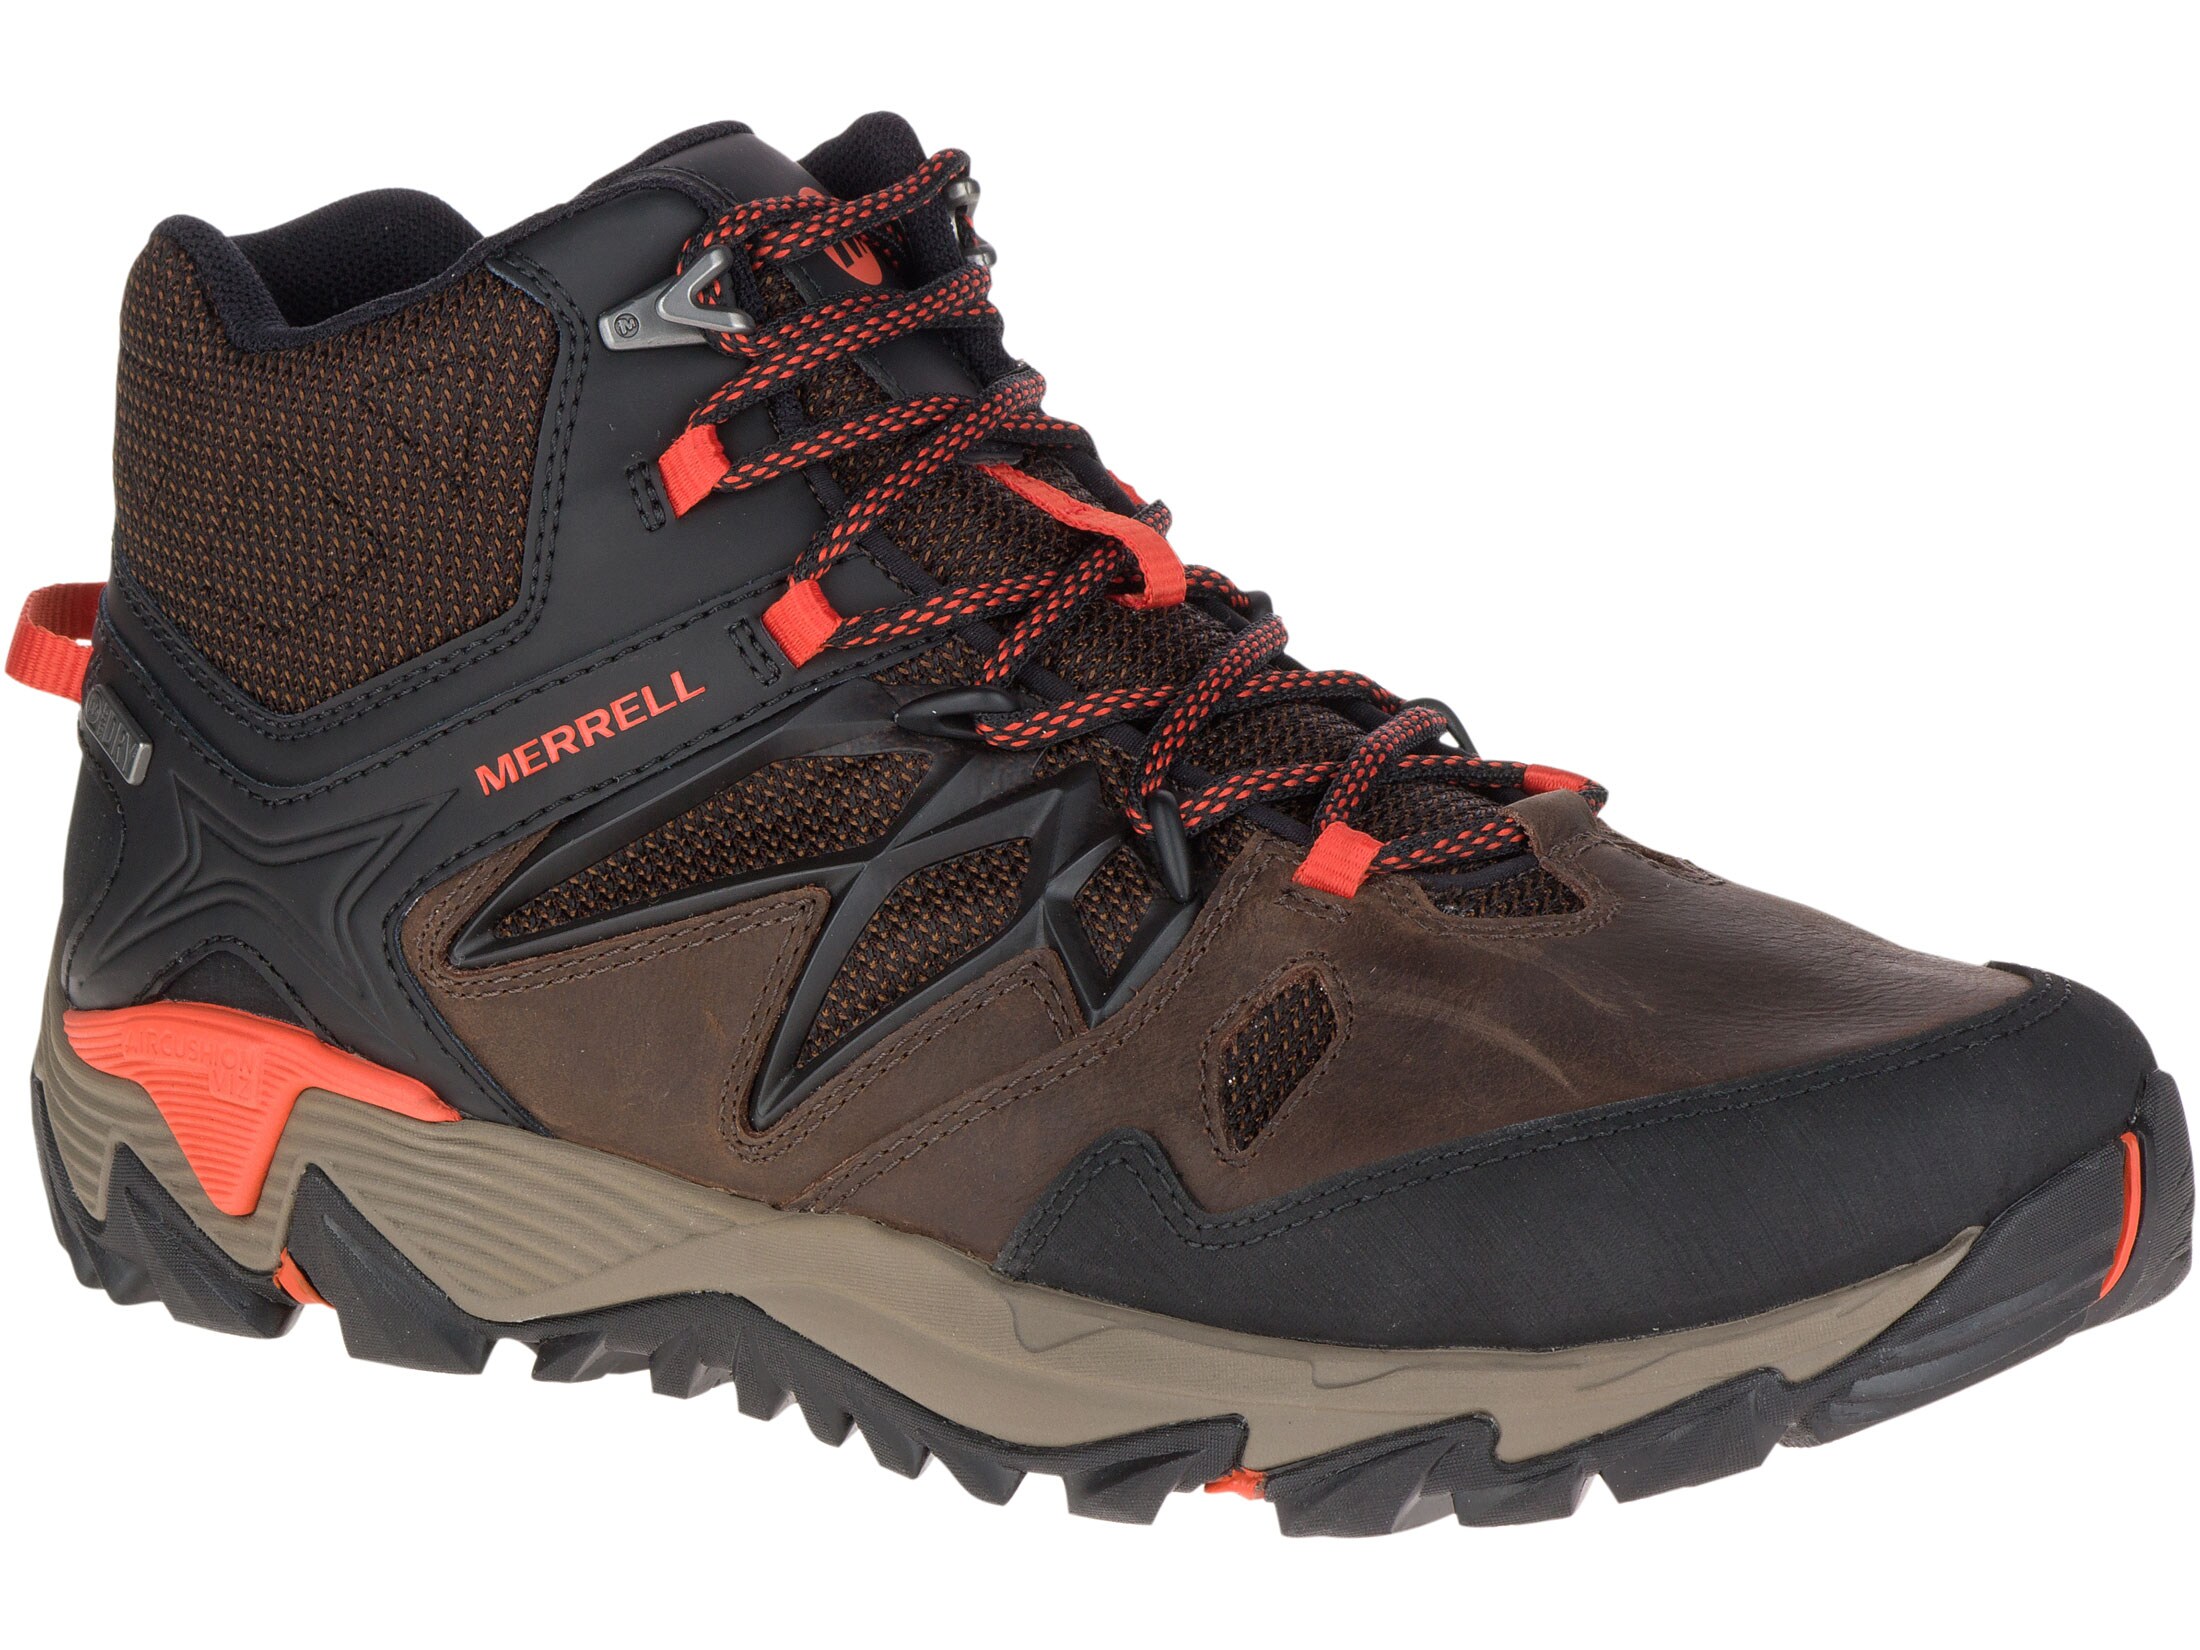 Merrell All Out Blaze 2 Mid 5 Waterproof Hiking Boots Leather/Nylon